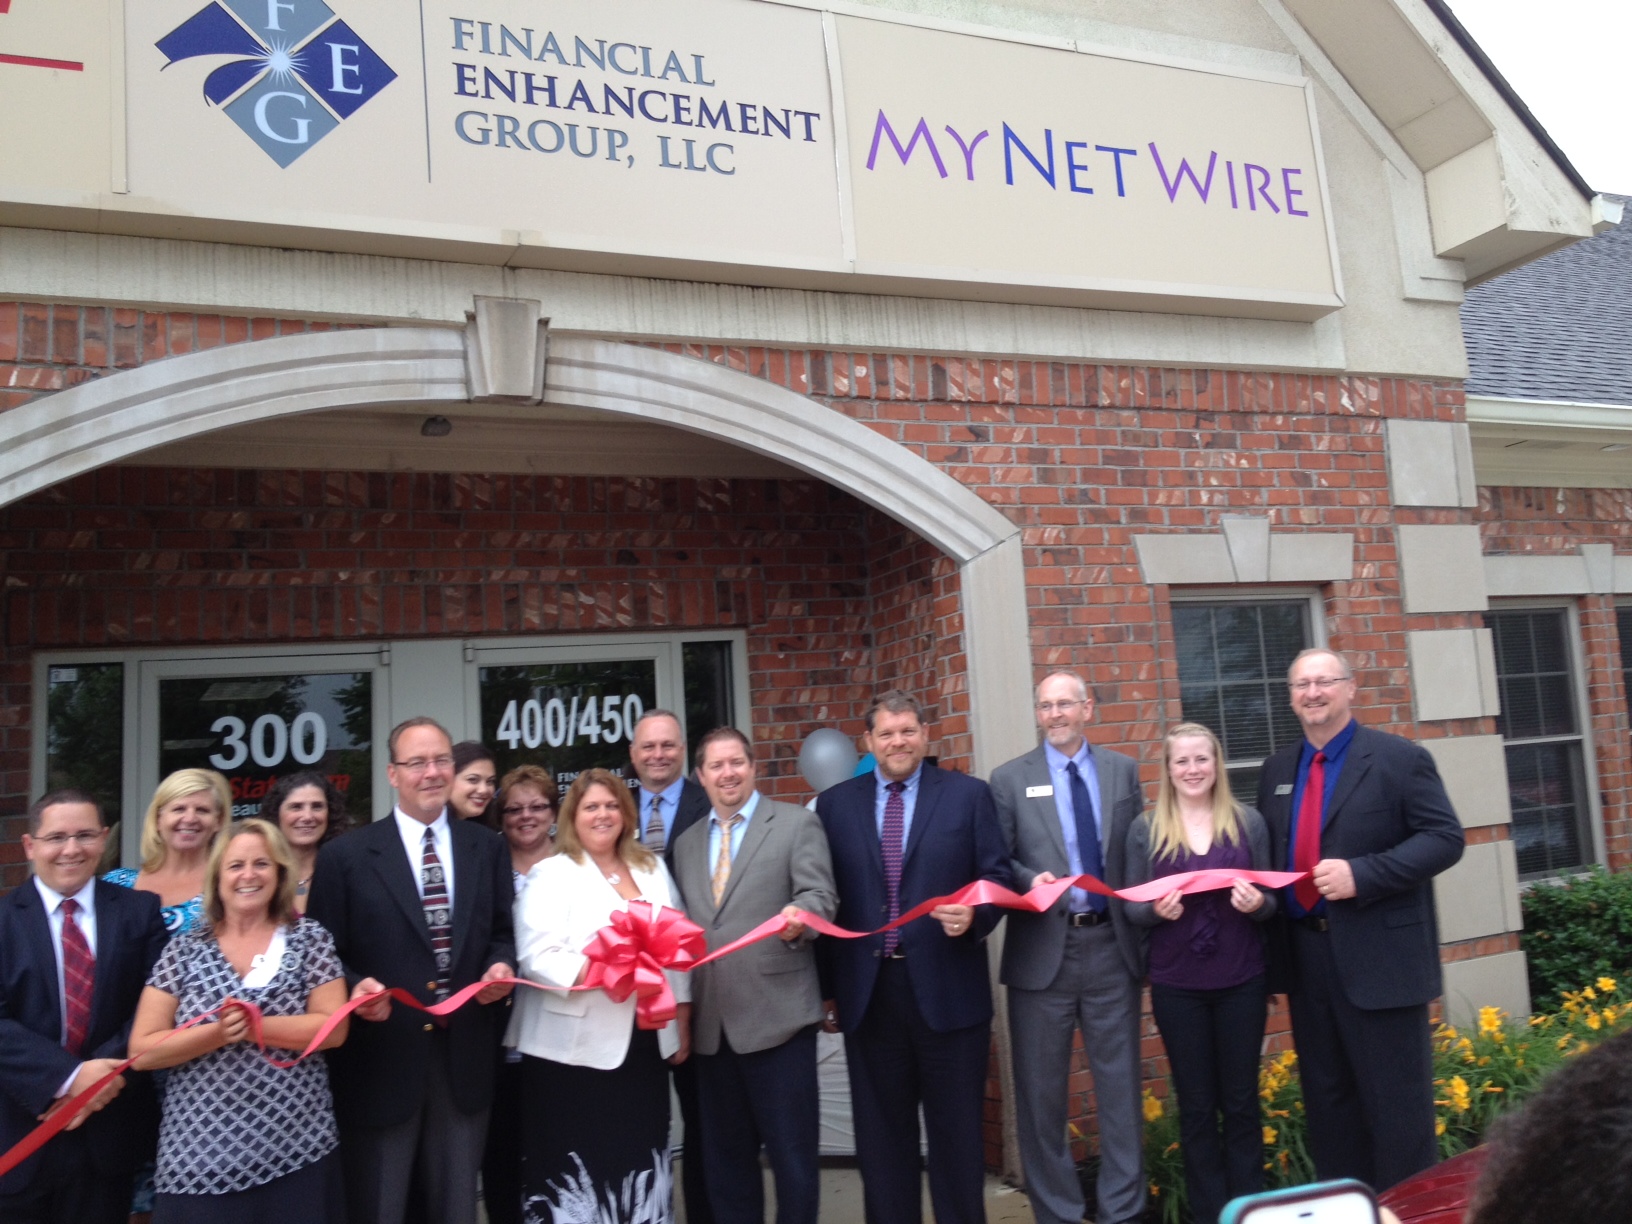 The Financial Enhancement Group opened its new office at 96th and I-69 recently. (Submitted photo)